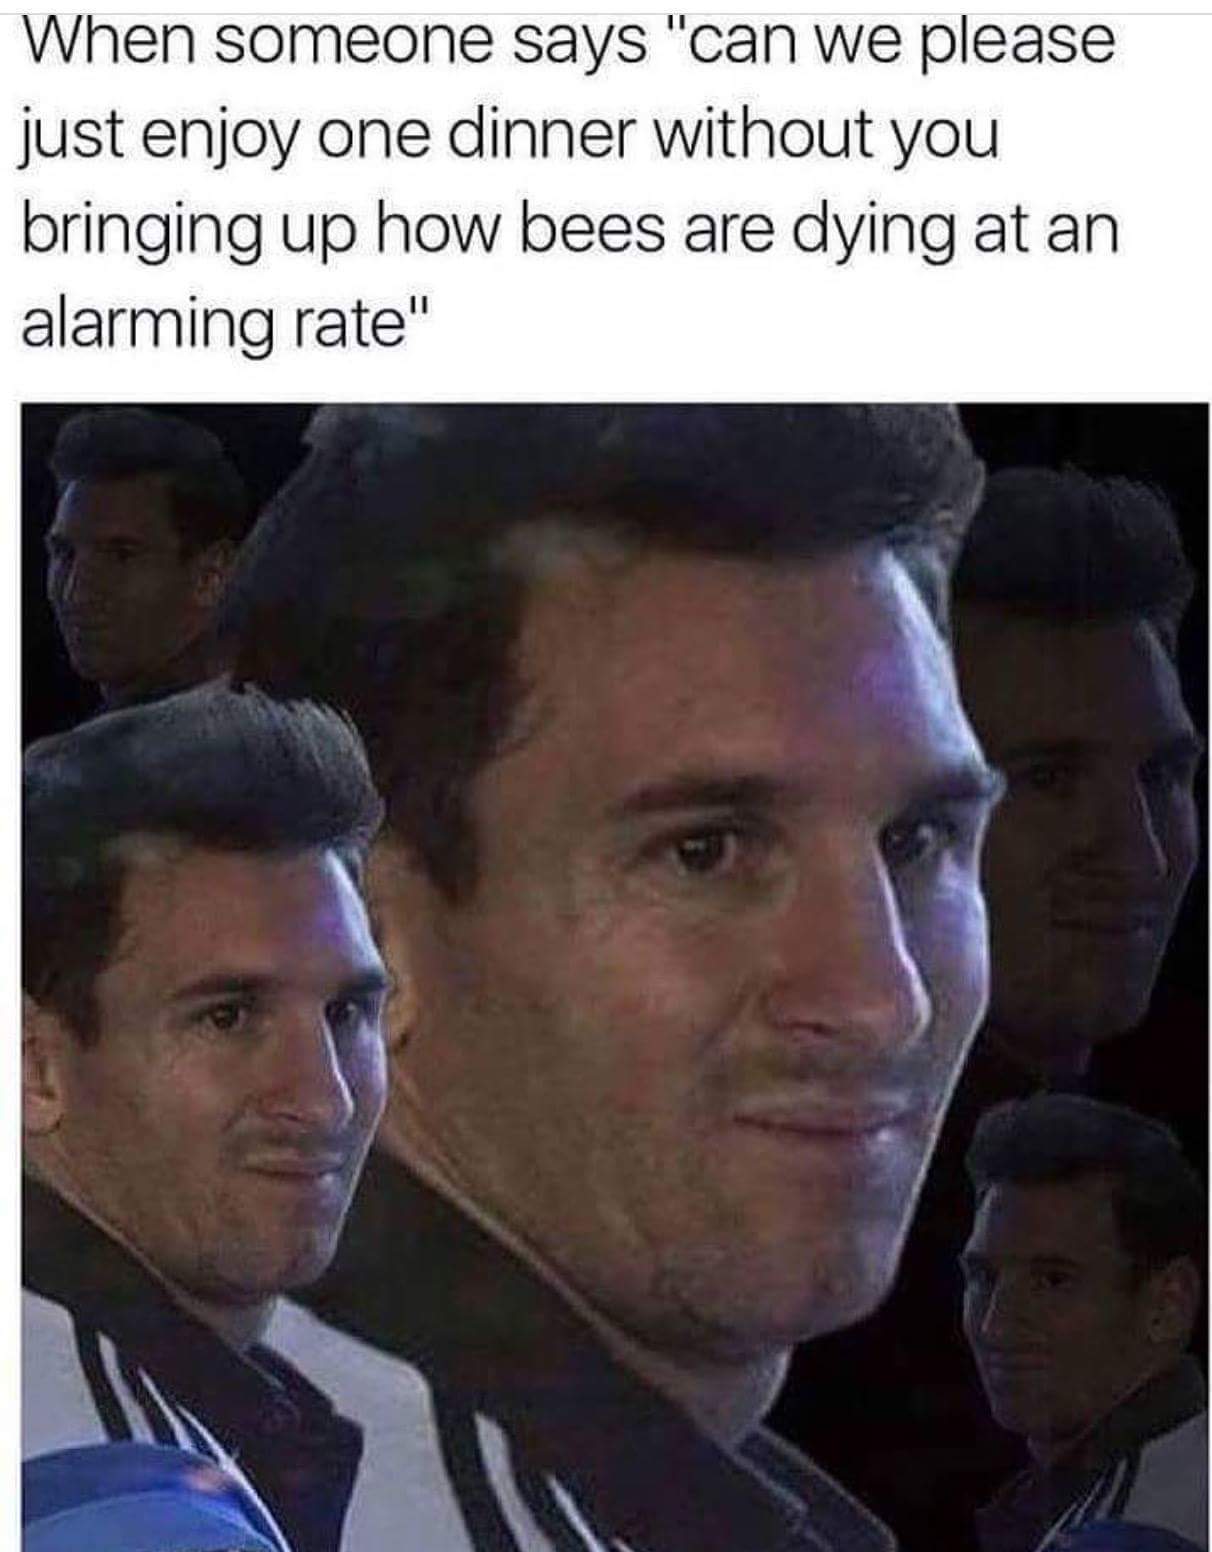 Save the bees 2k16 - meme